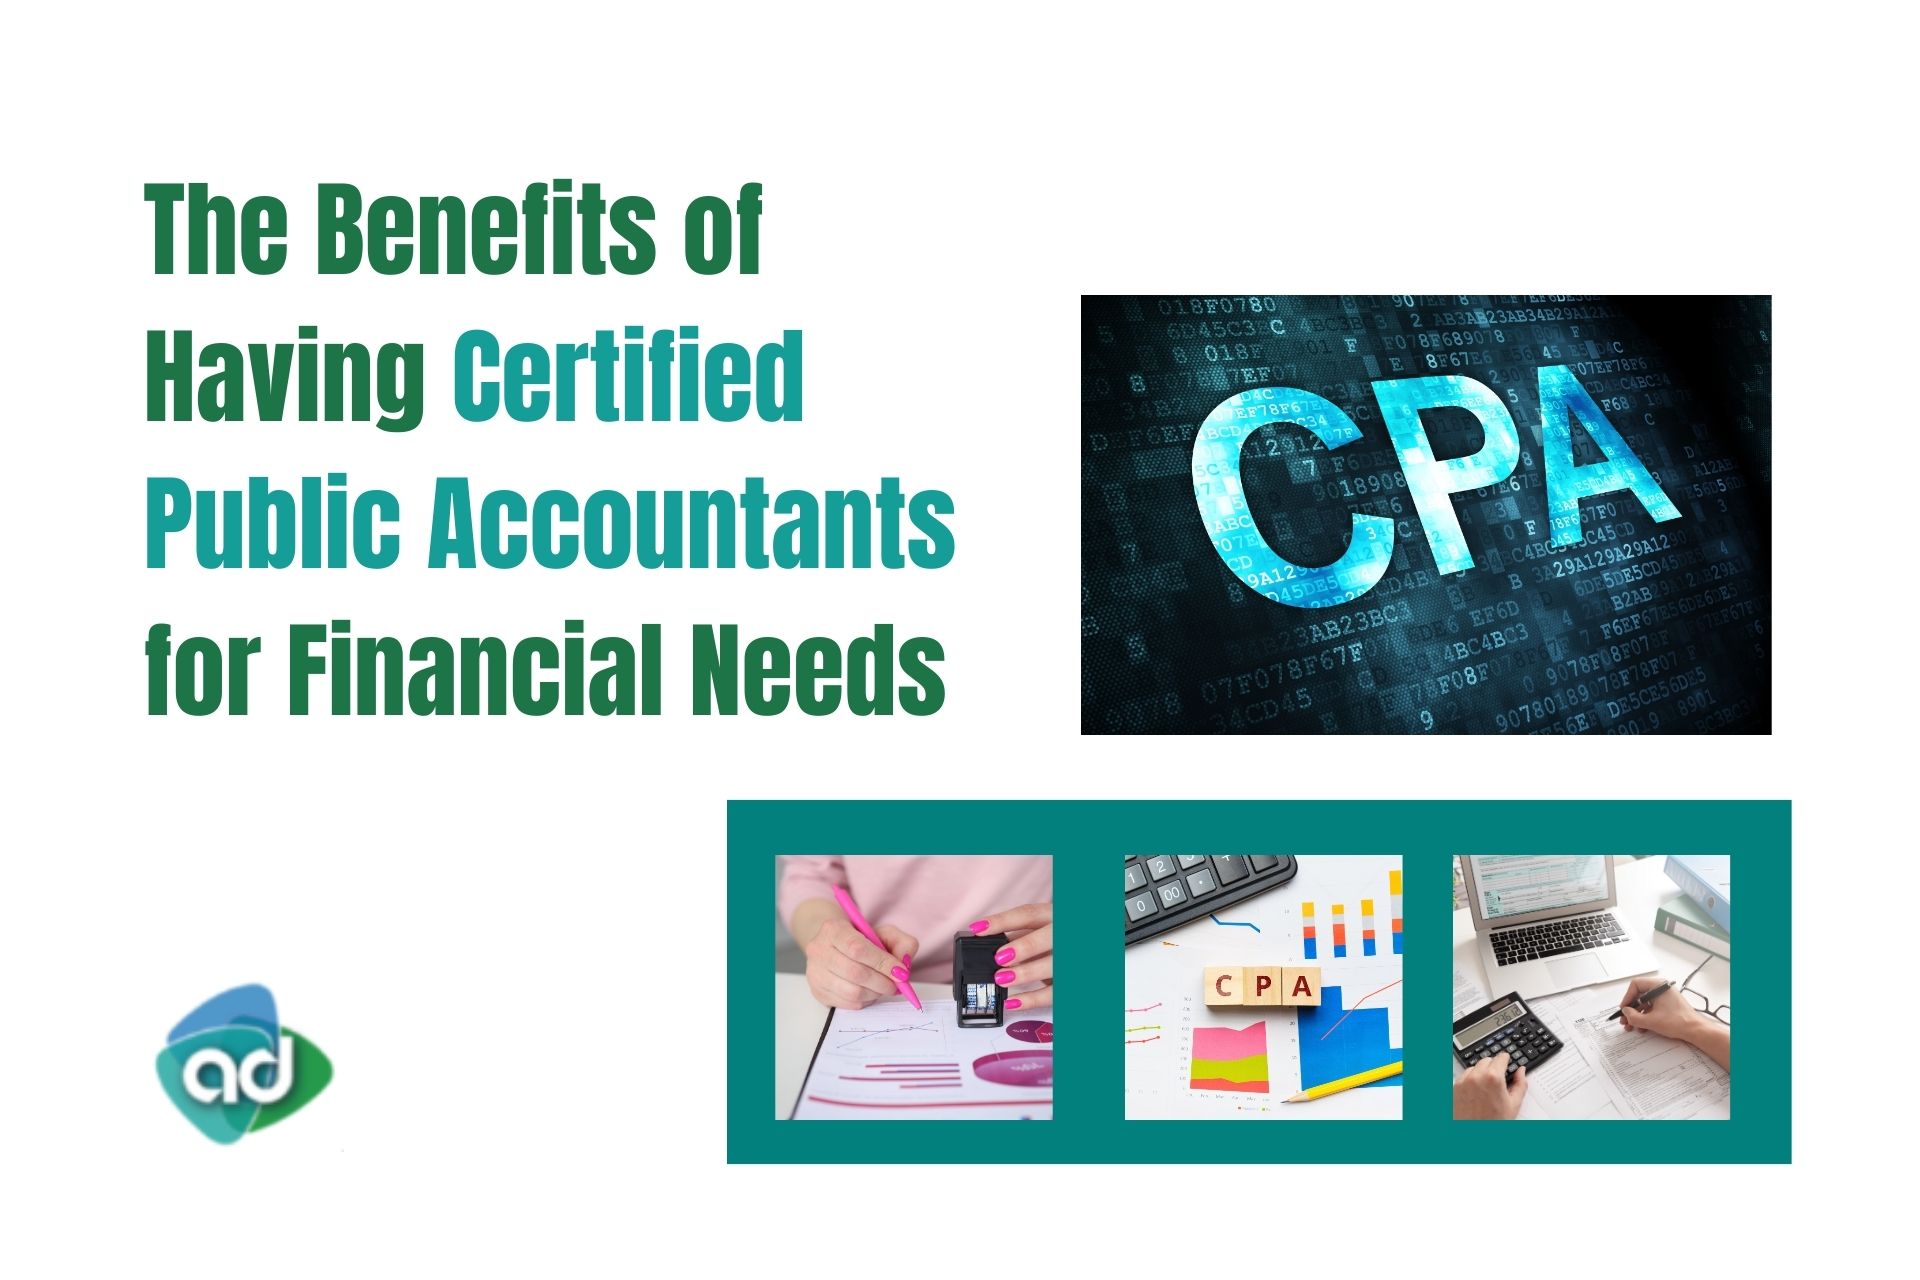 The Benefits of Having Certified Public Accountants for Financial Needs